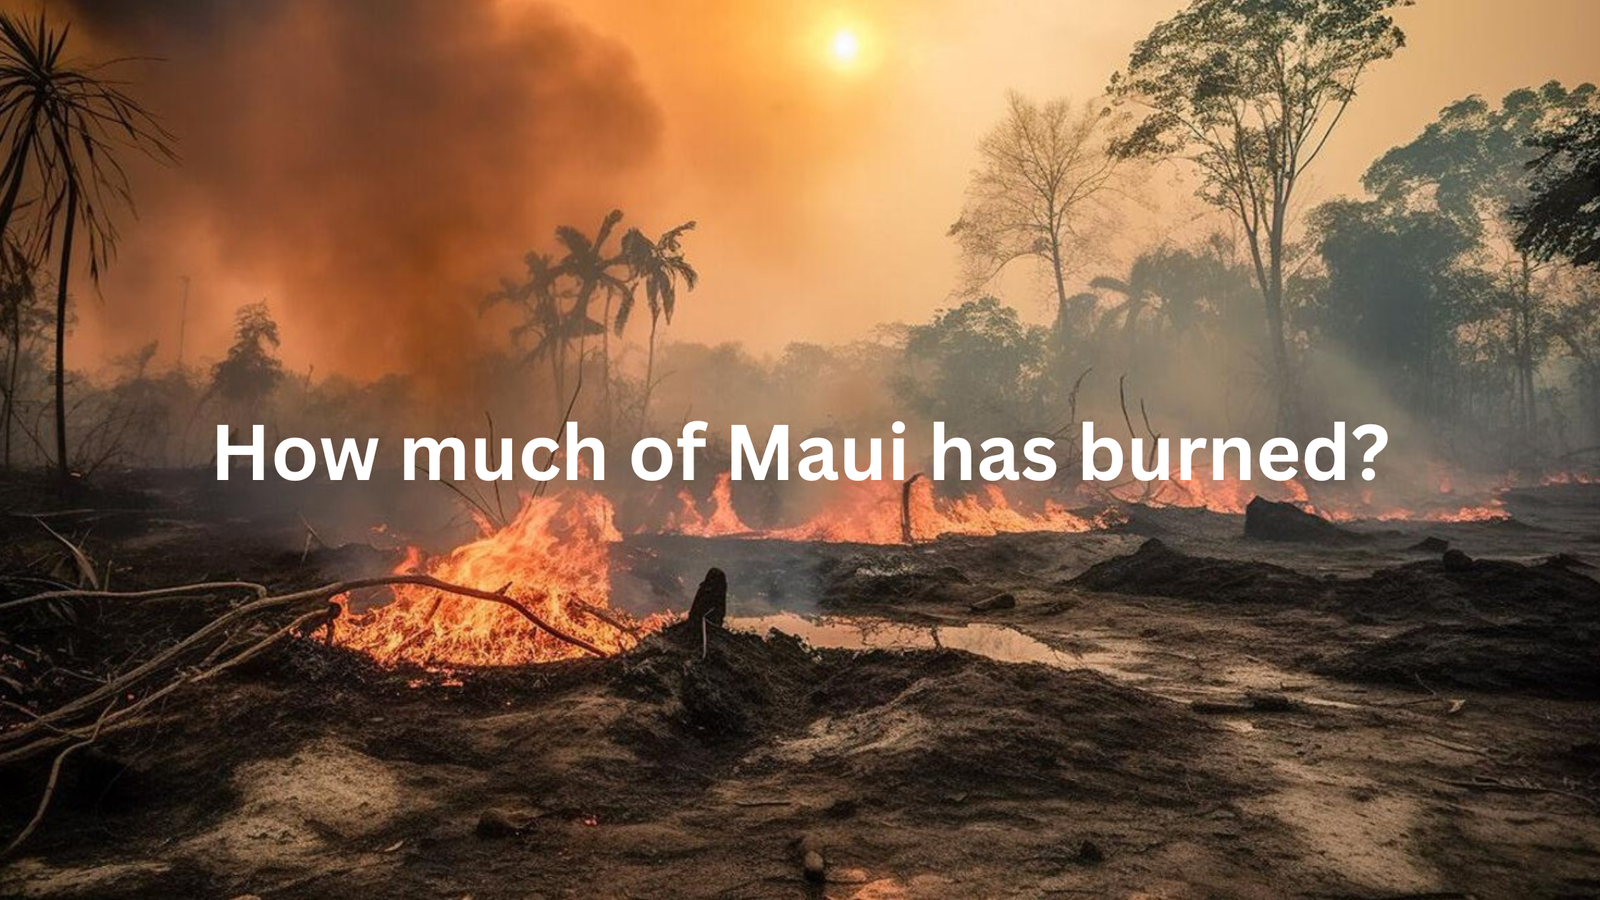 How much of Maui has burned?